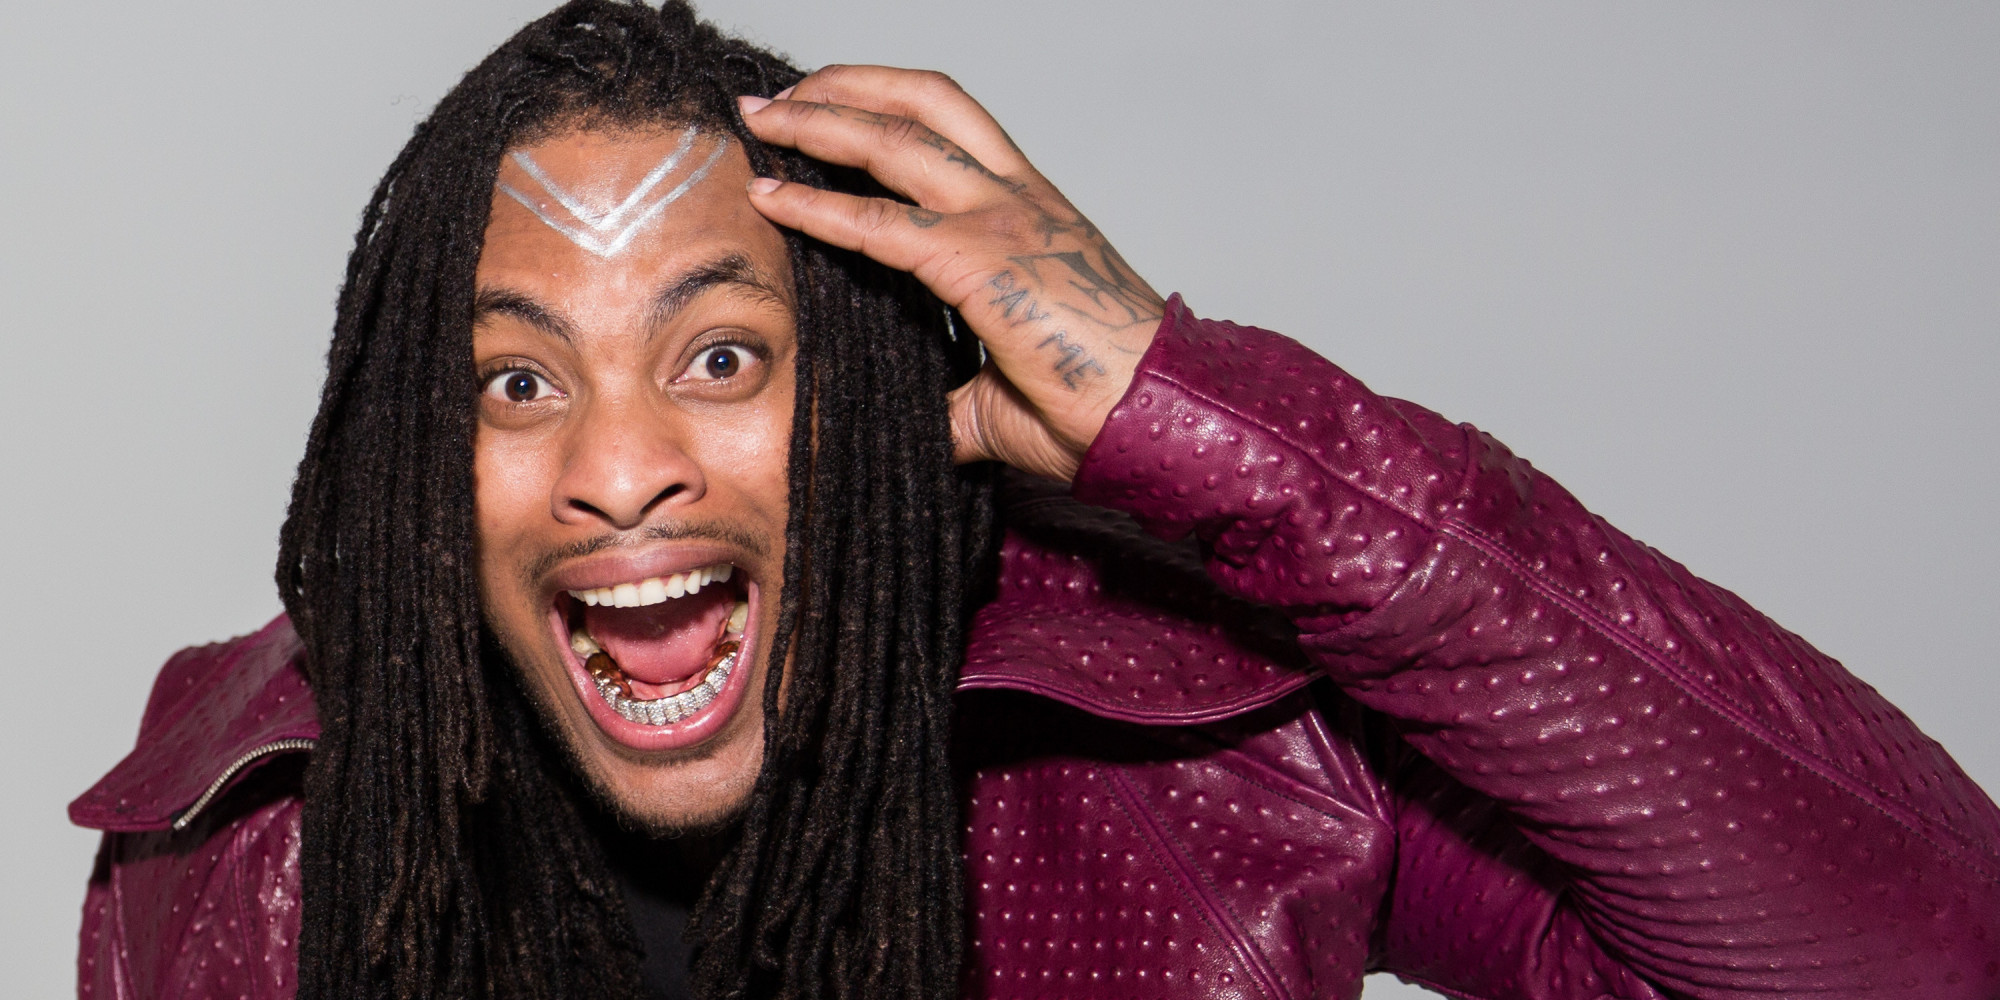 Waka Flocka Flame Offers $50k For Personal Blunt Roller